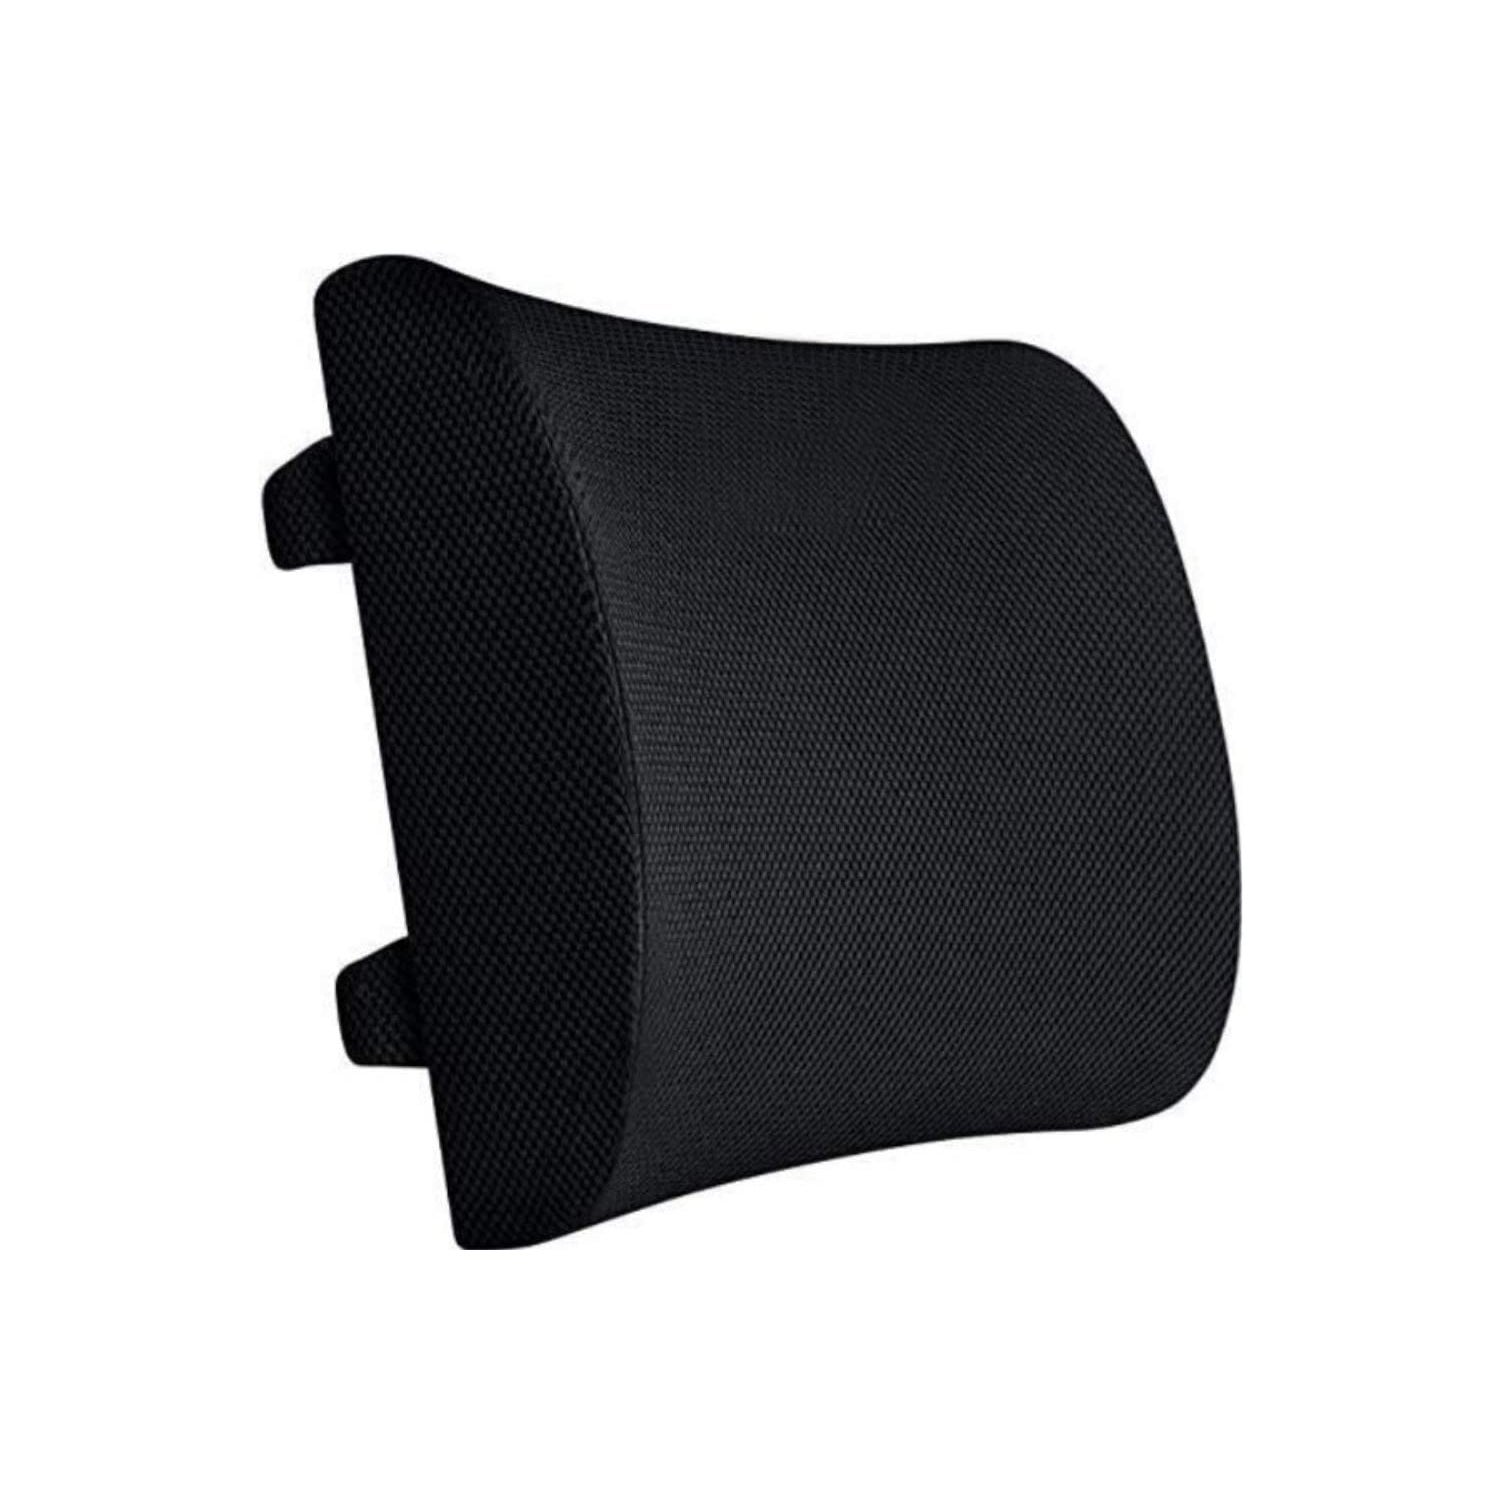 Premium Support Pillow for Office Chair Cushion - Black